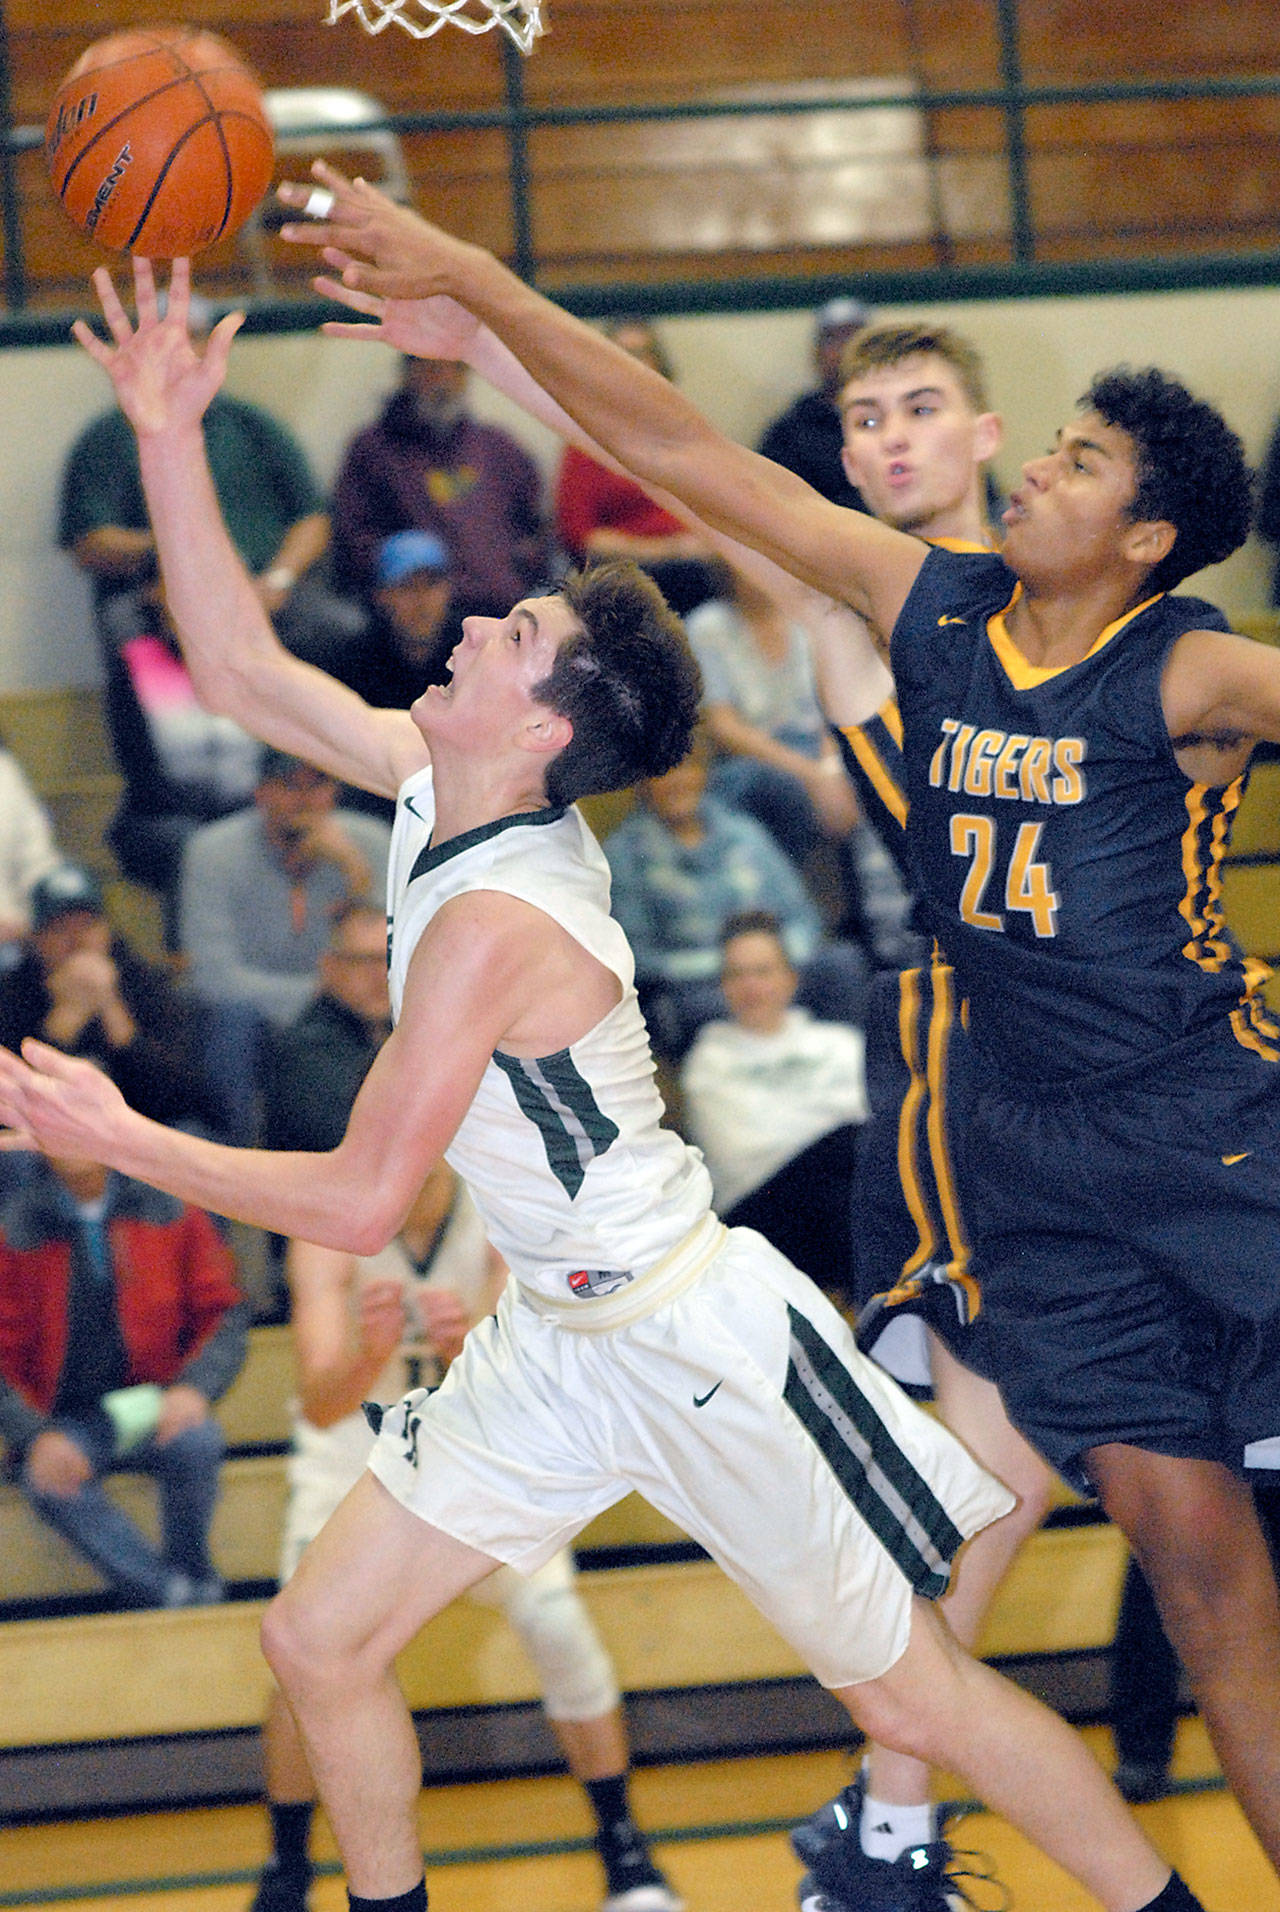 Port Angeles’ Gabriel Long, left, goes for a layup as Burlington-Edison’s Taino Ferdinand defends in the second quarter on Saturday at Port Angeles High School. (Keith Thorpe/Peninsula Daily News)